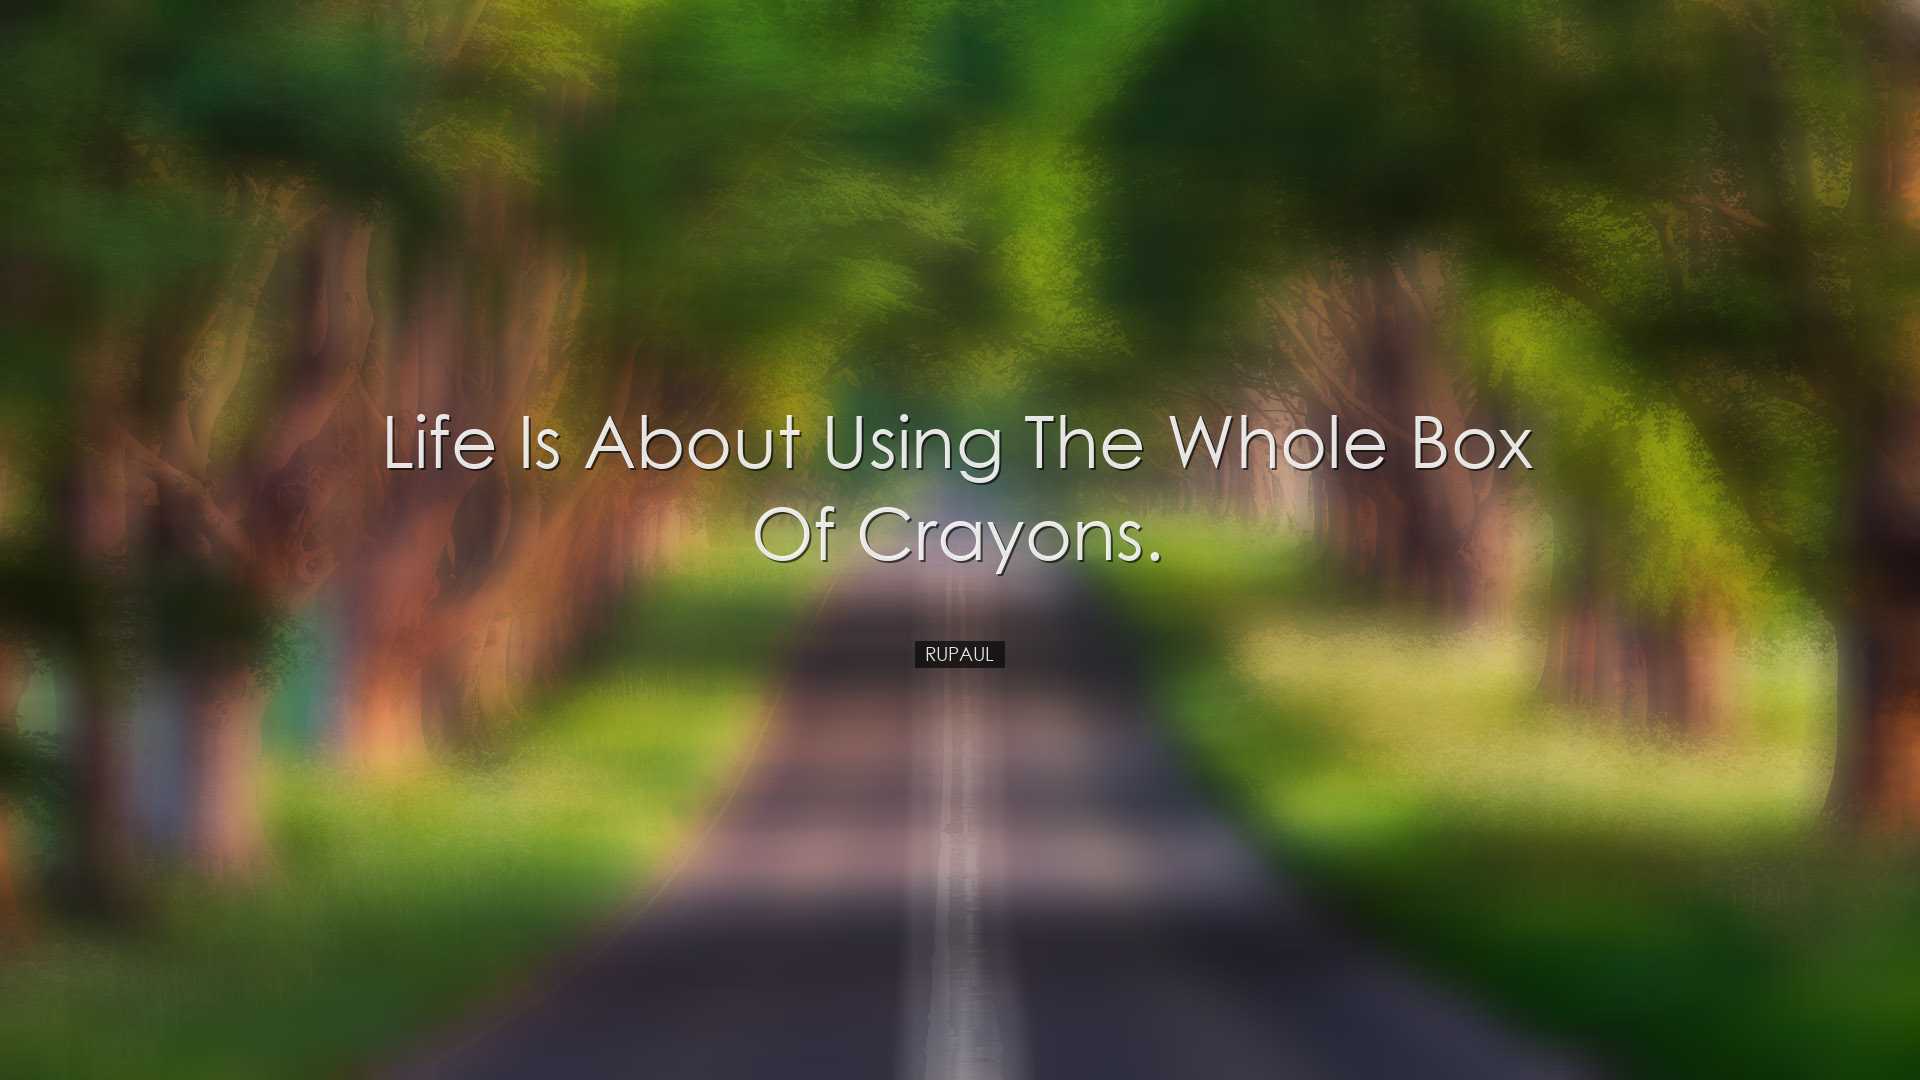 Life is about using the whole box of crayons. - RuPaul